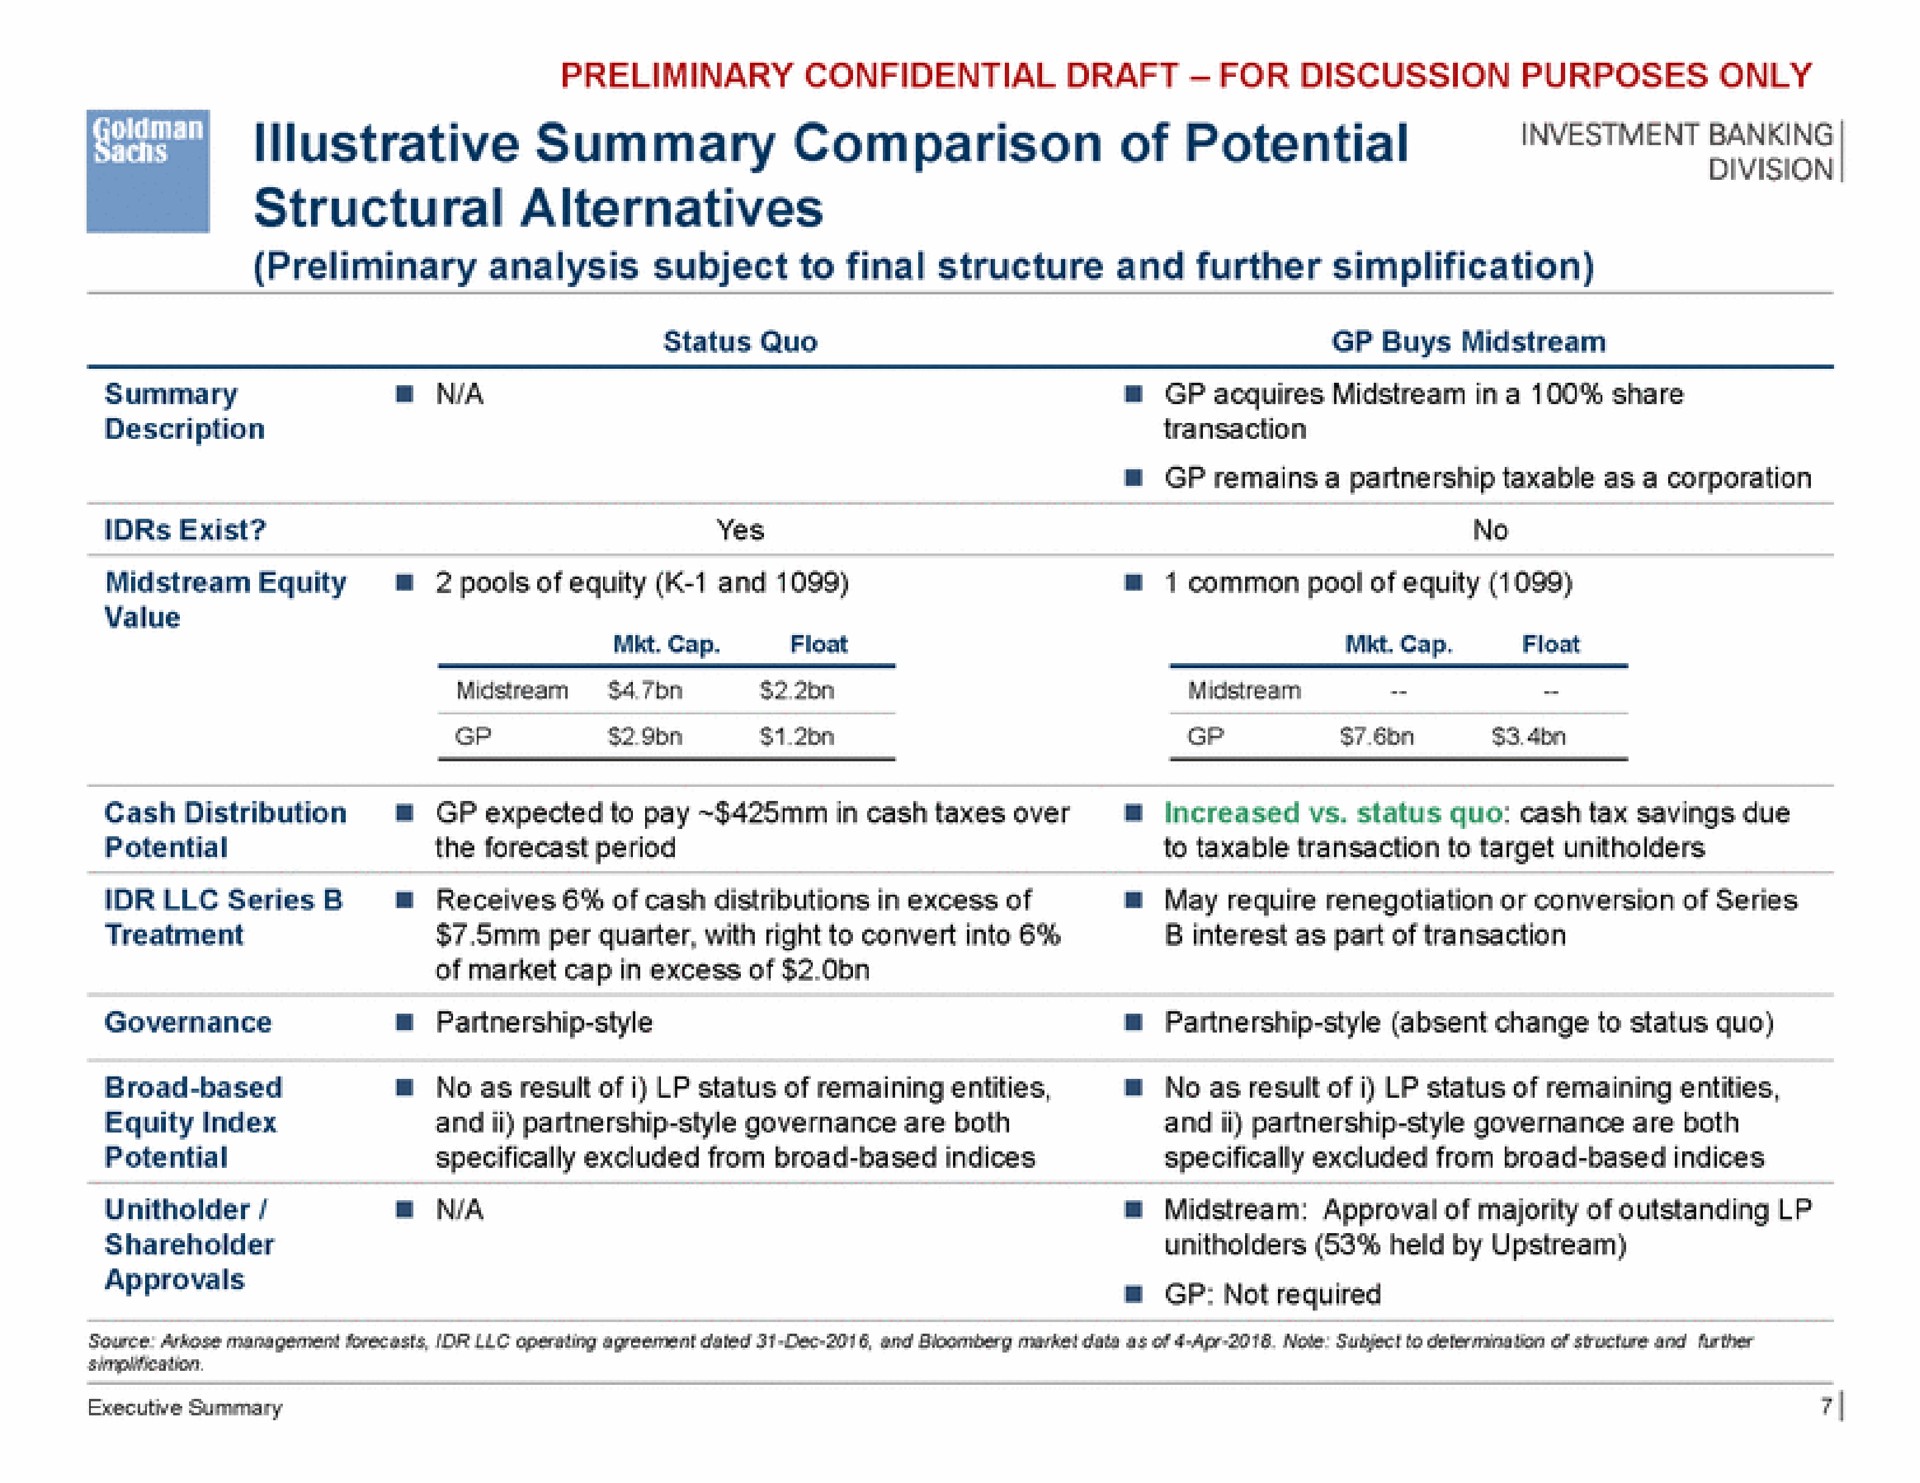 summary comparison of potential structural alternatives | Goldman Sachs